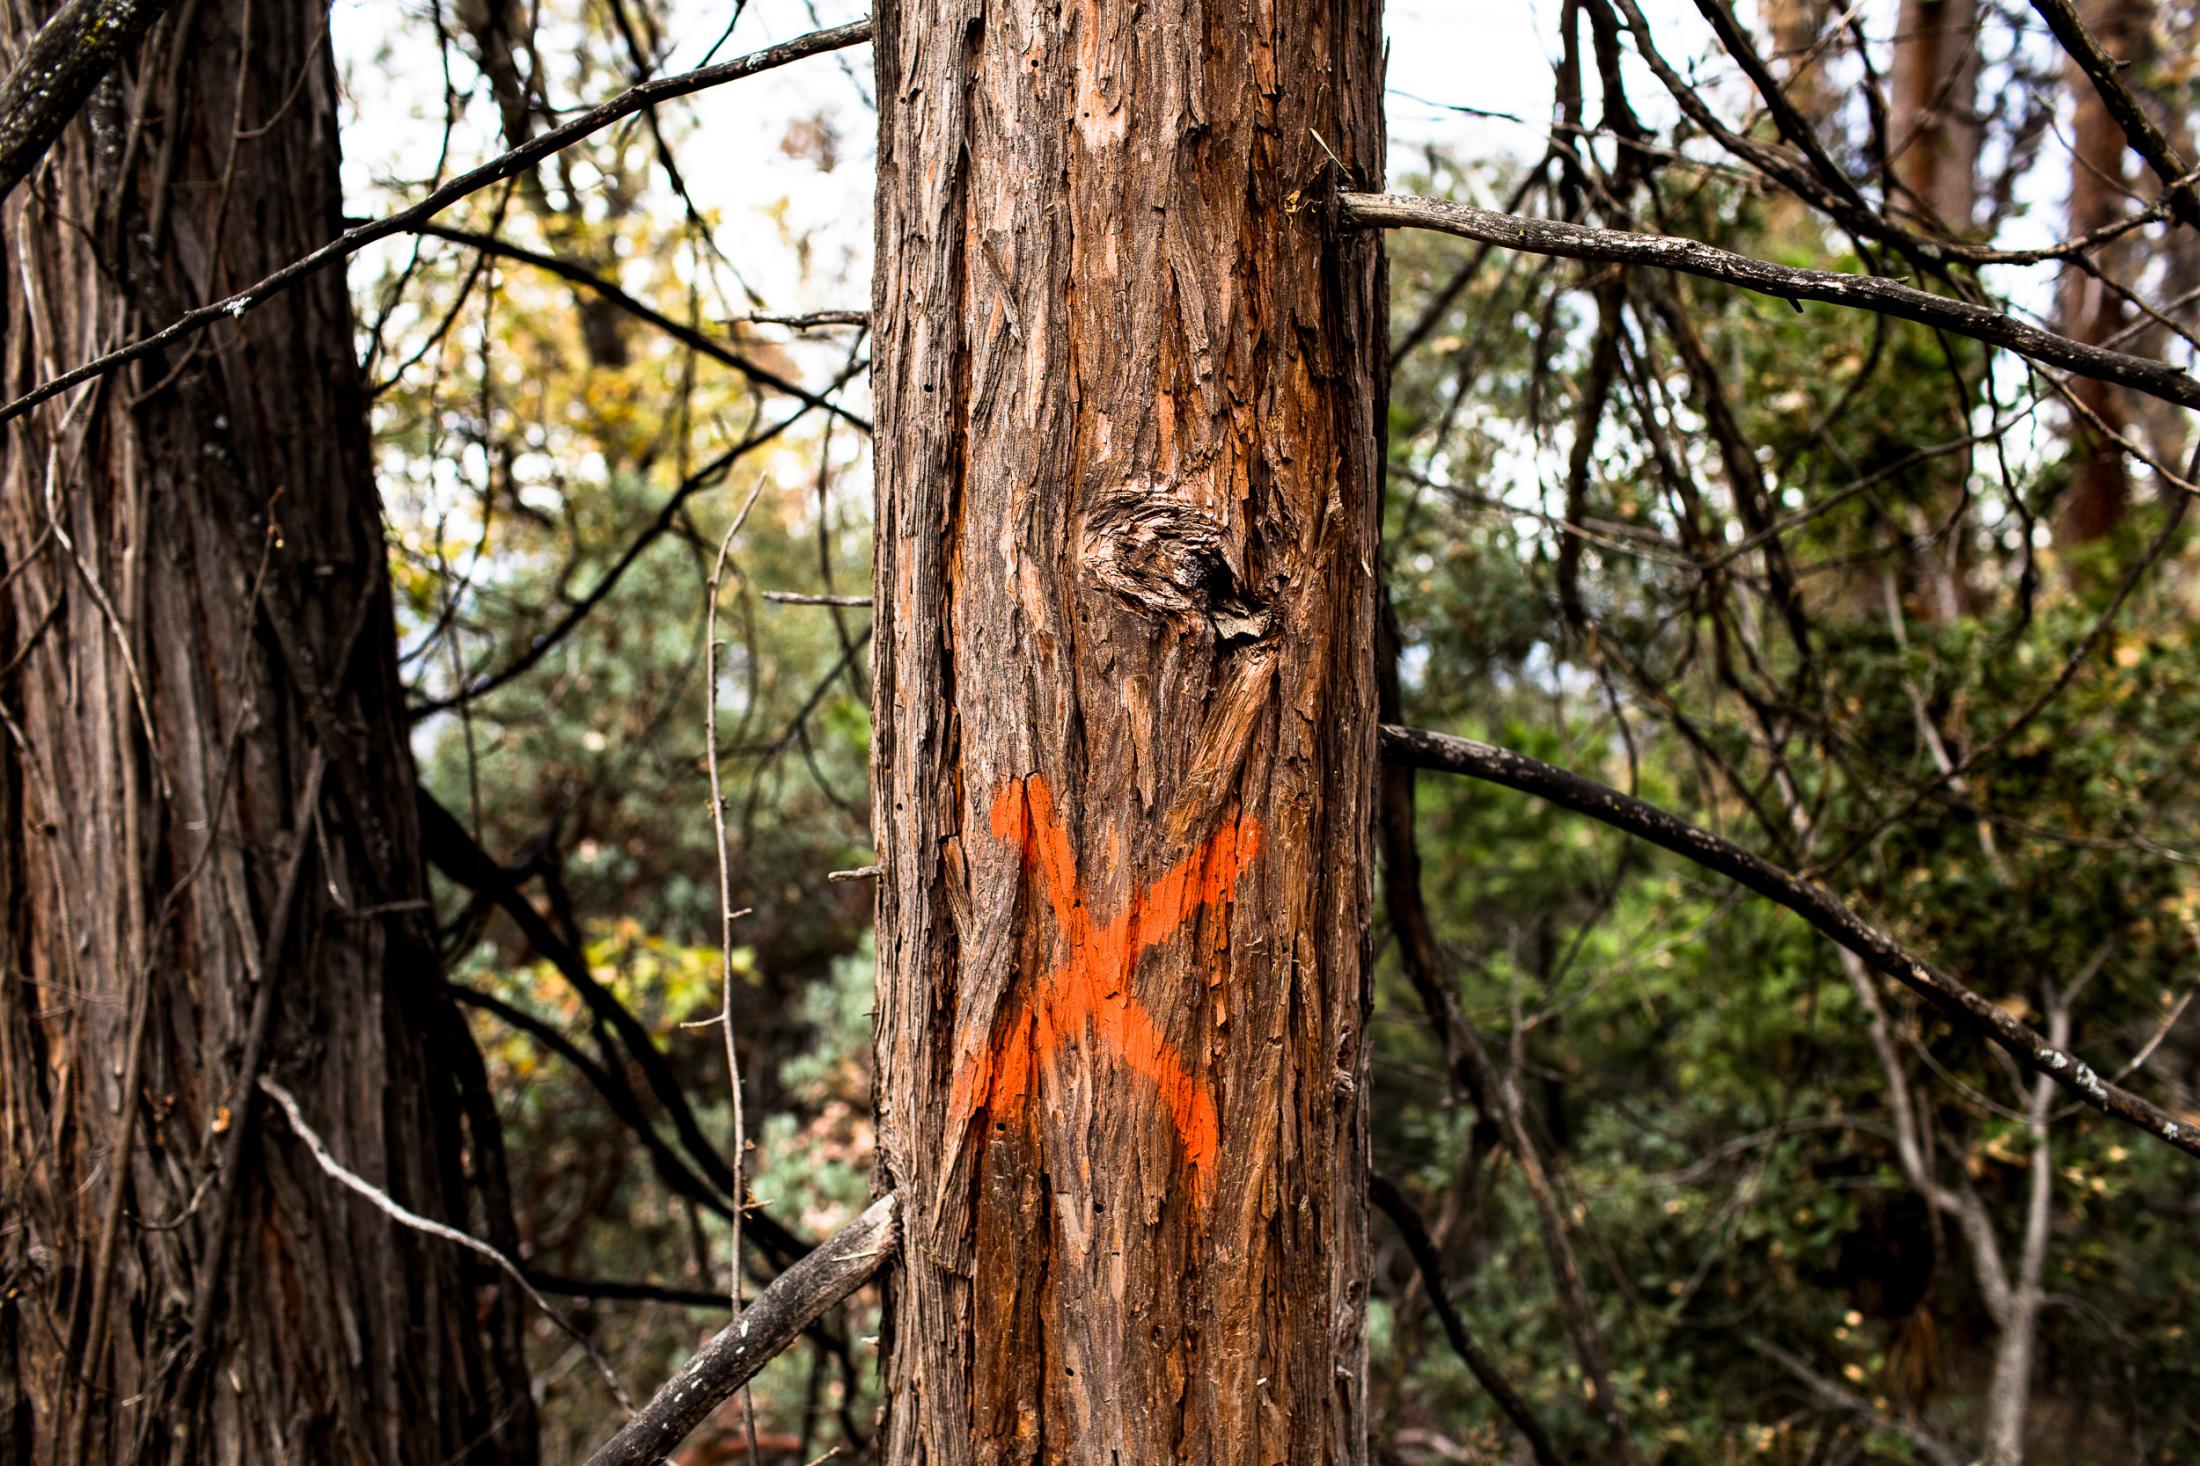  - Prescribed burns  - A tree with bark beetle holes that has been designated...